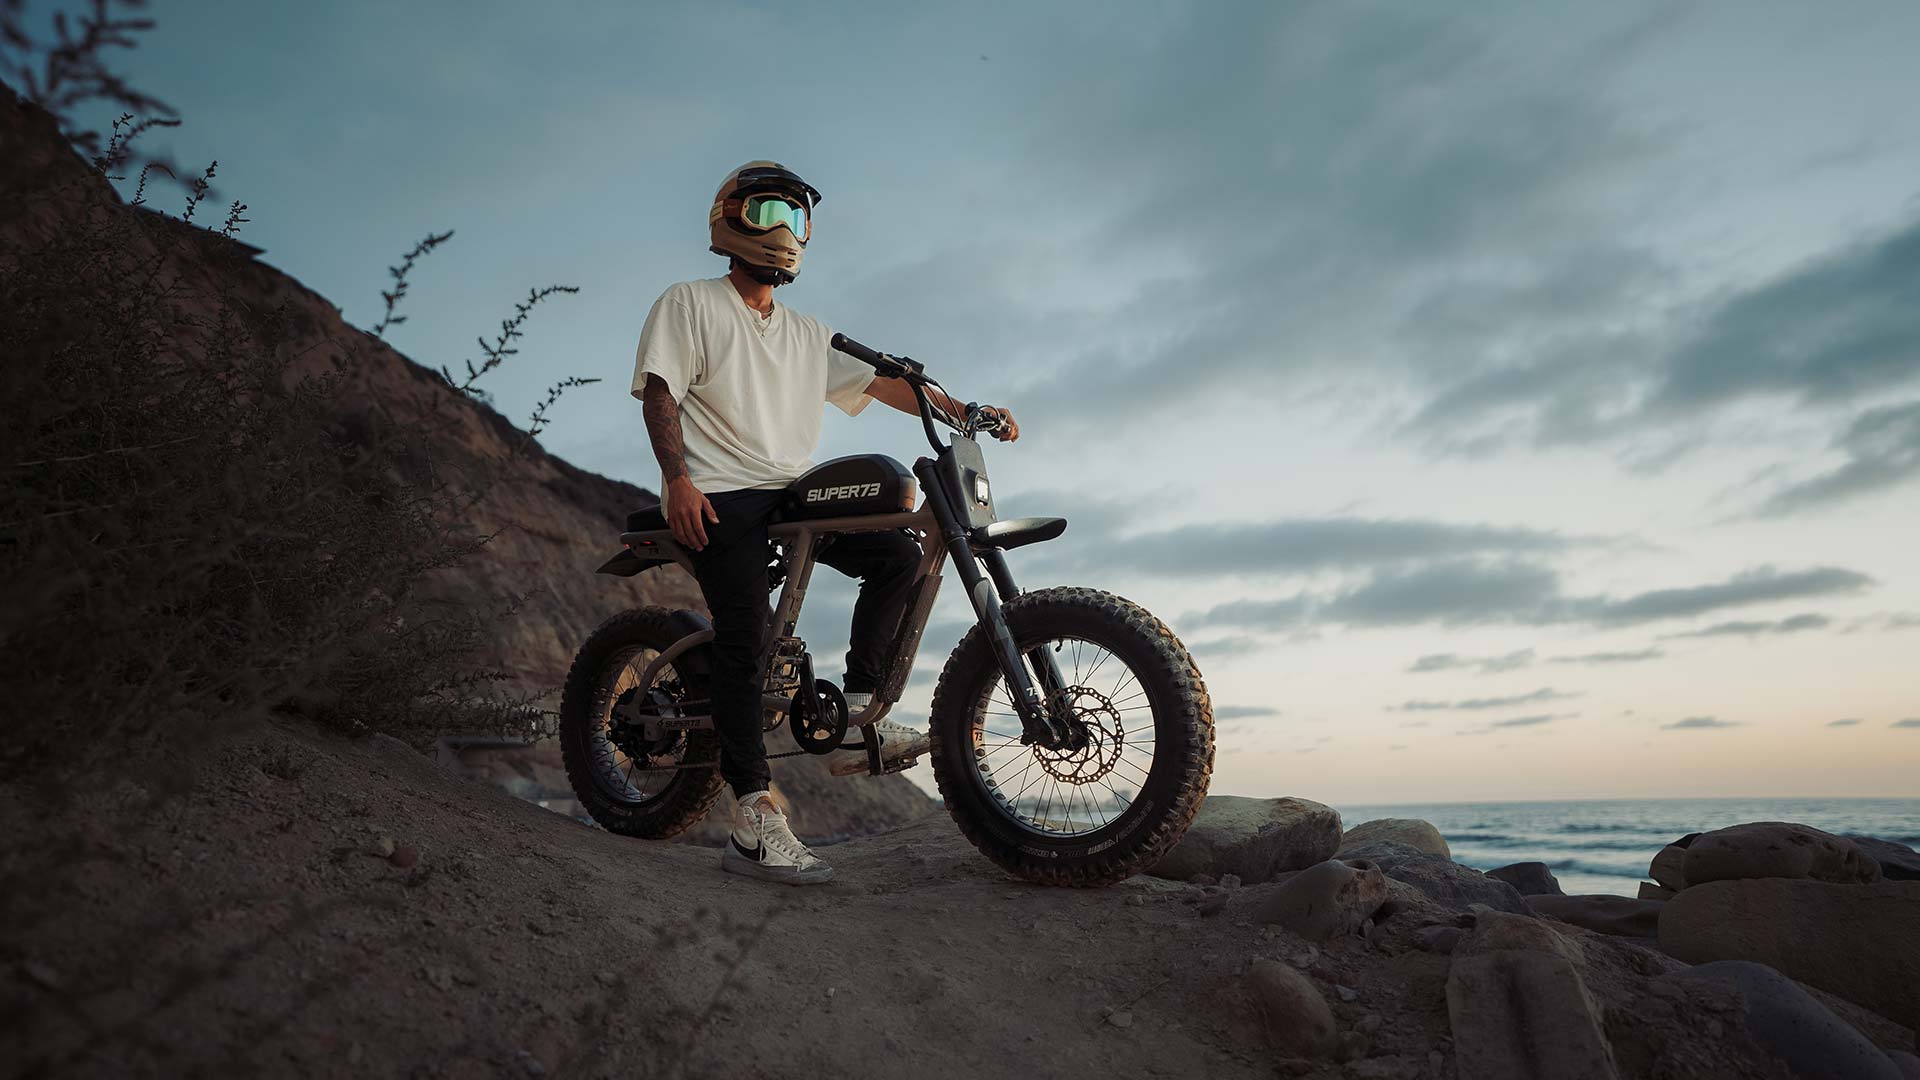 Young man sitting on a Super73 ebike on the side of a dirt mountain